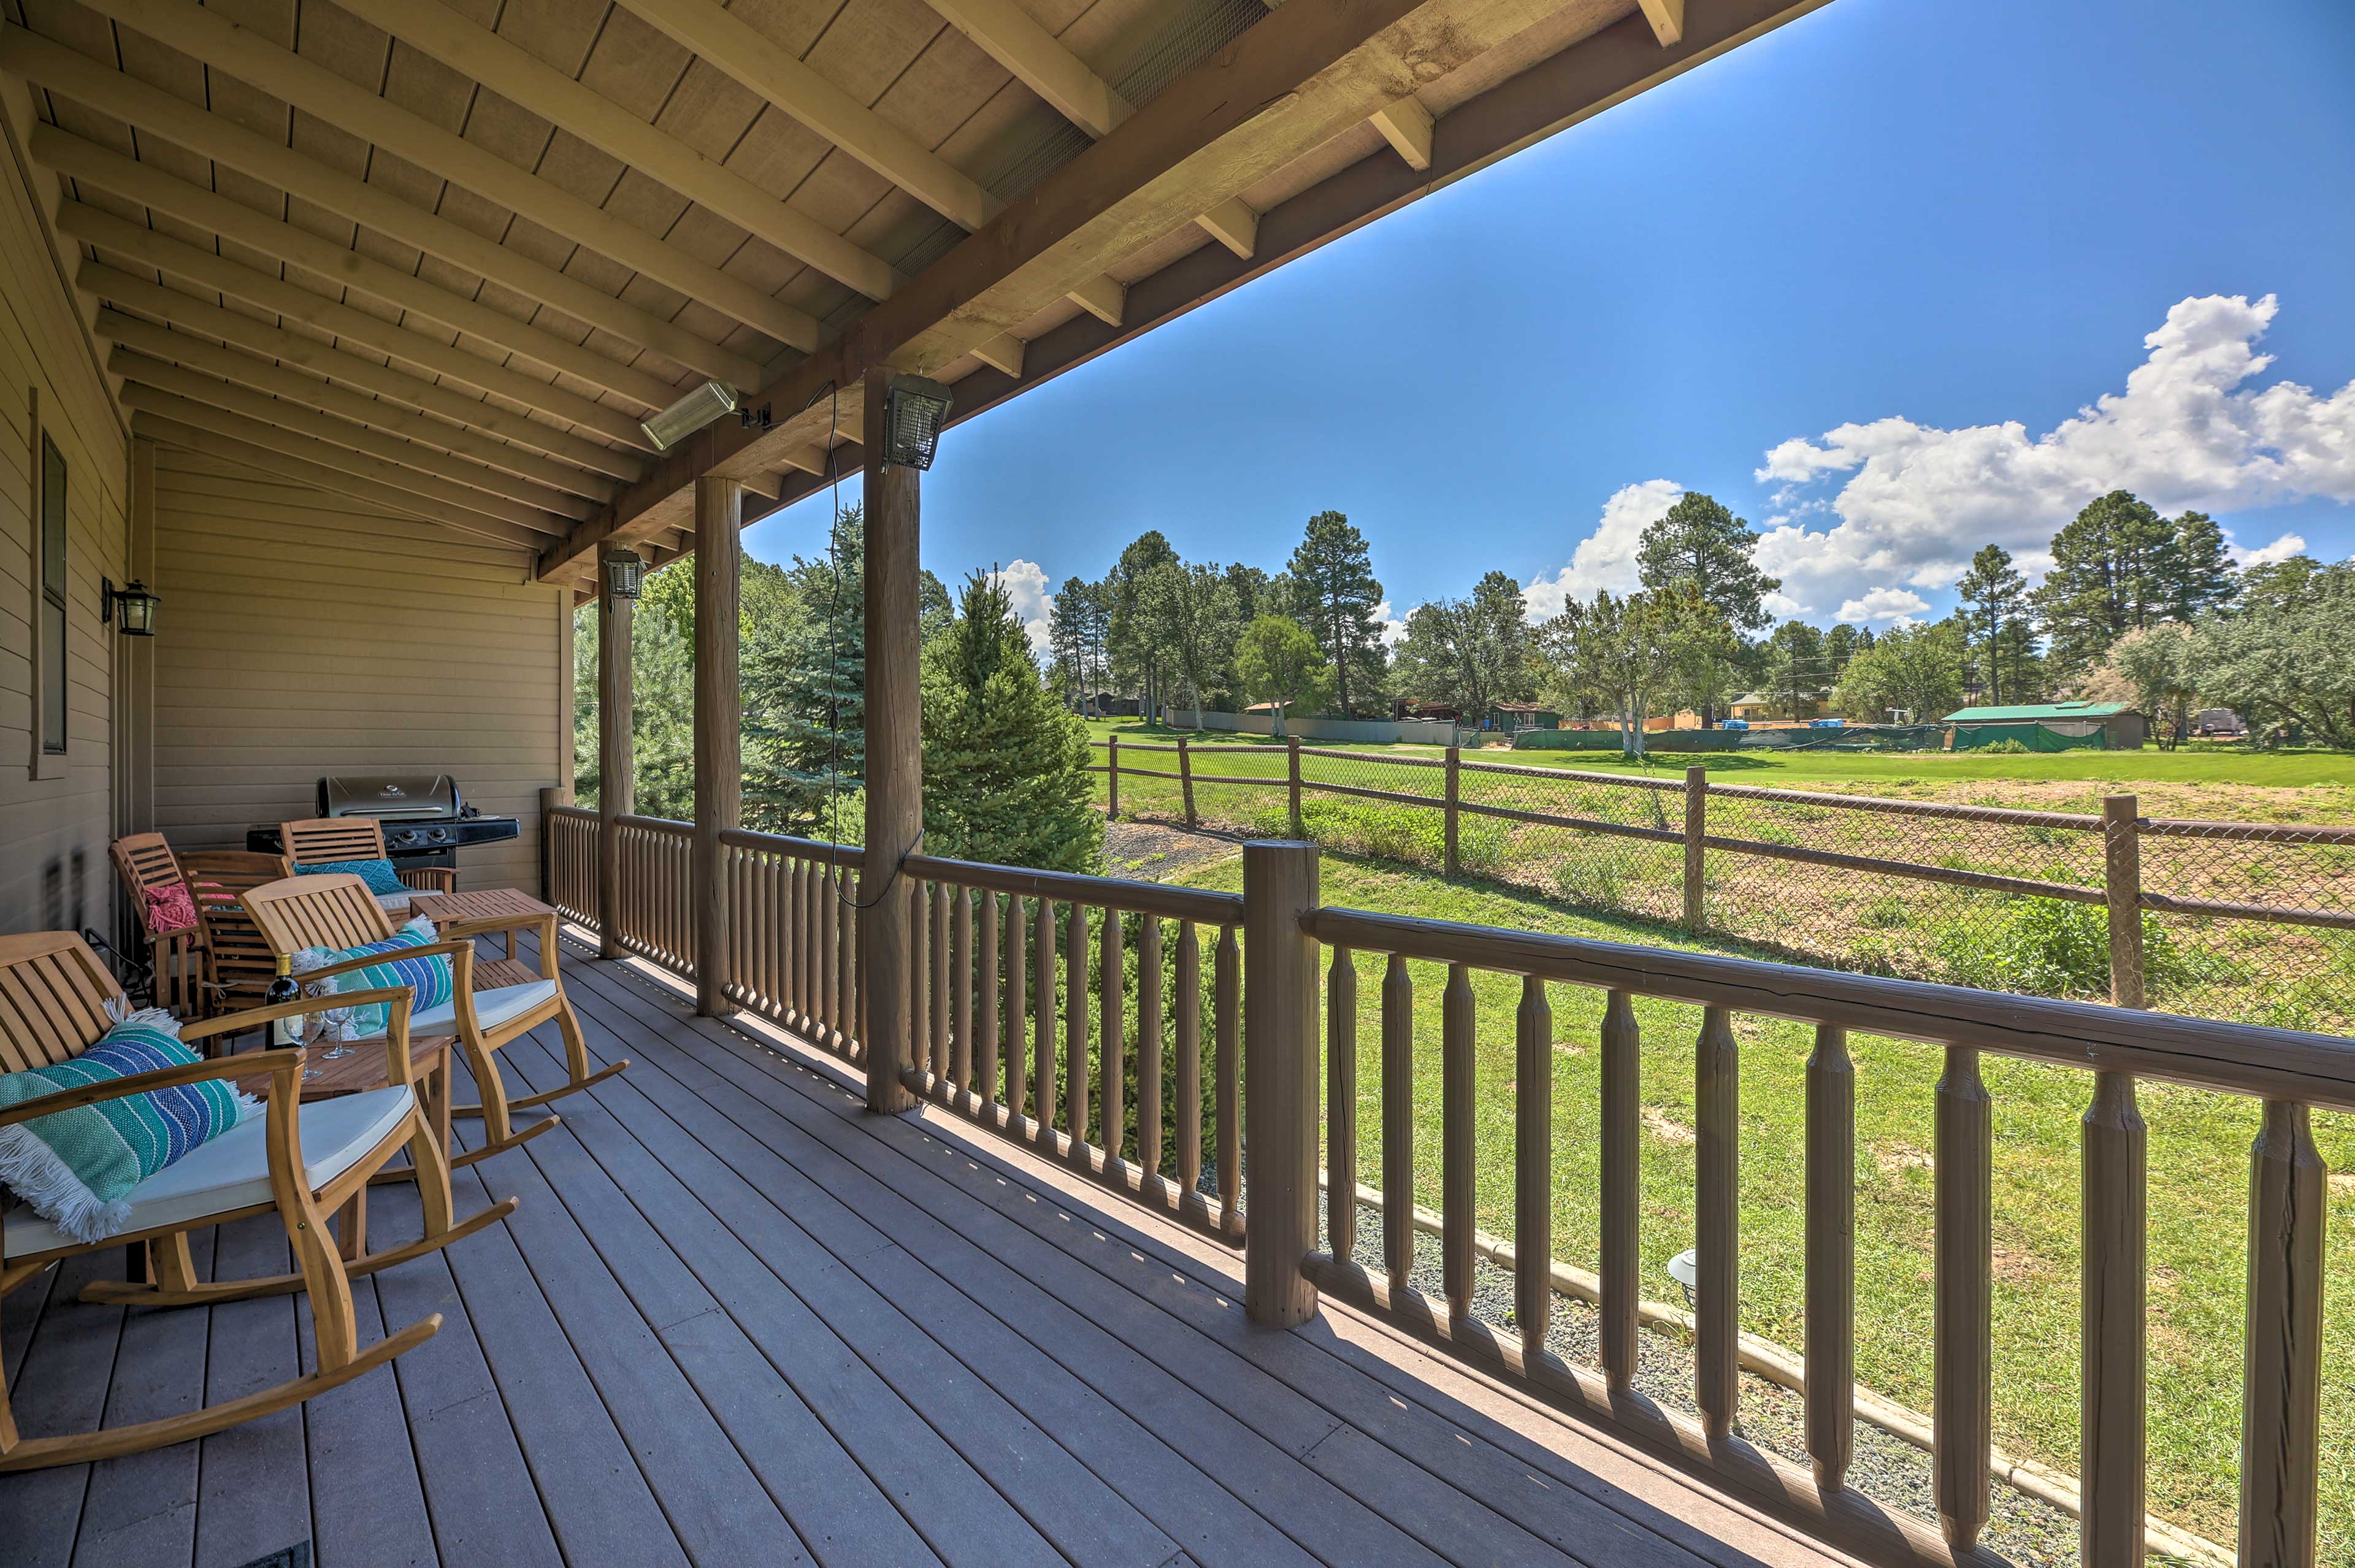 Property Image 2 - Sunny Show Low Home: Deck, BBQ & Golf Course Views